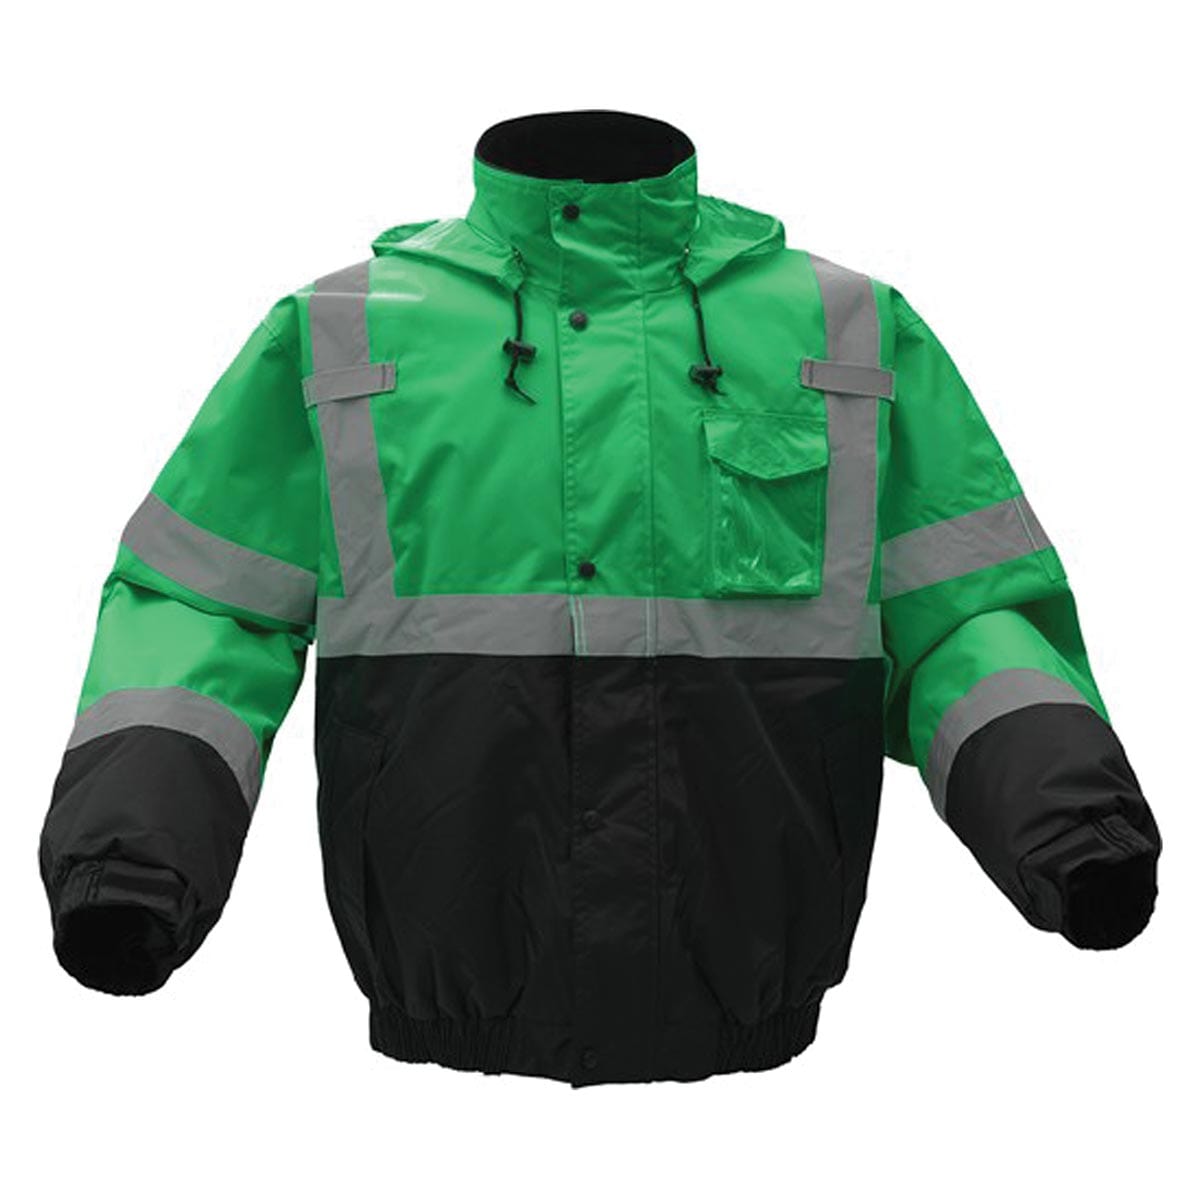 GSS Non-ANSI Waterproof Bomber Jacket w/Black Bottom Gemplers